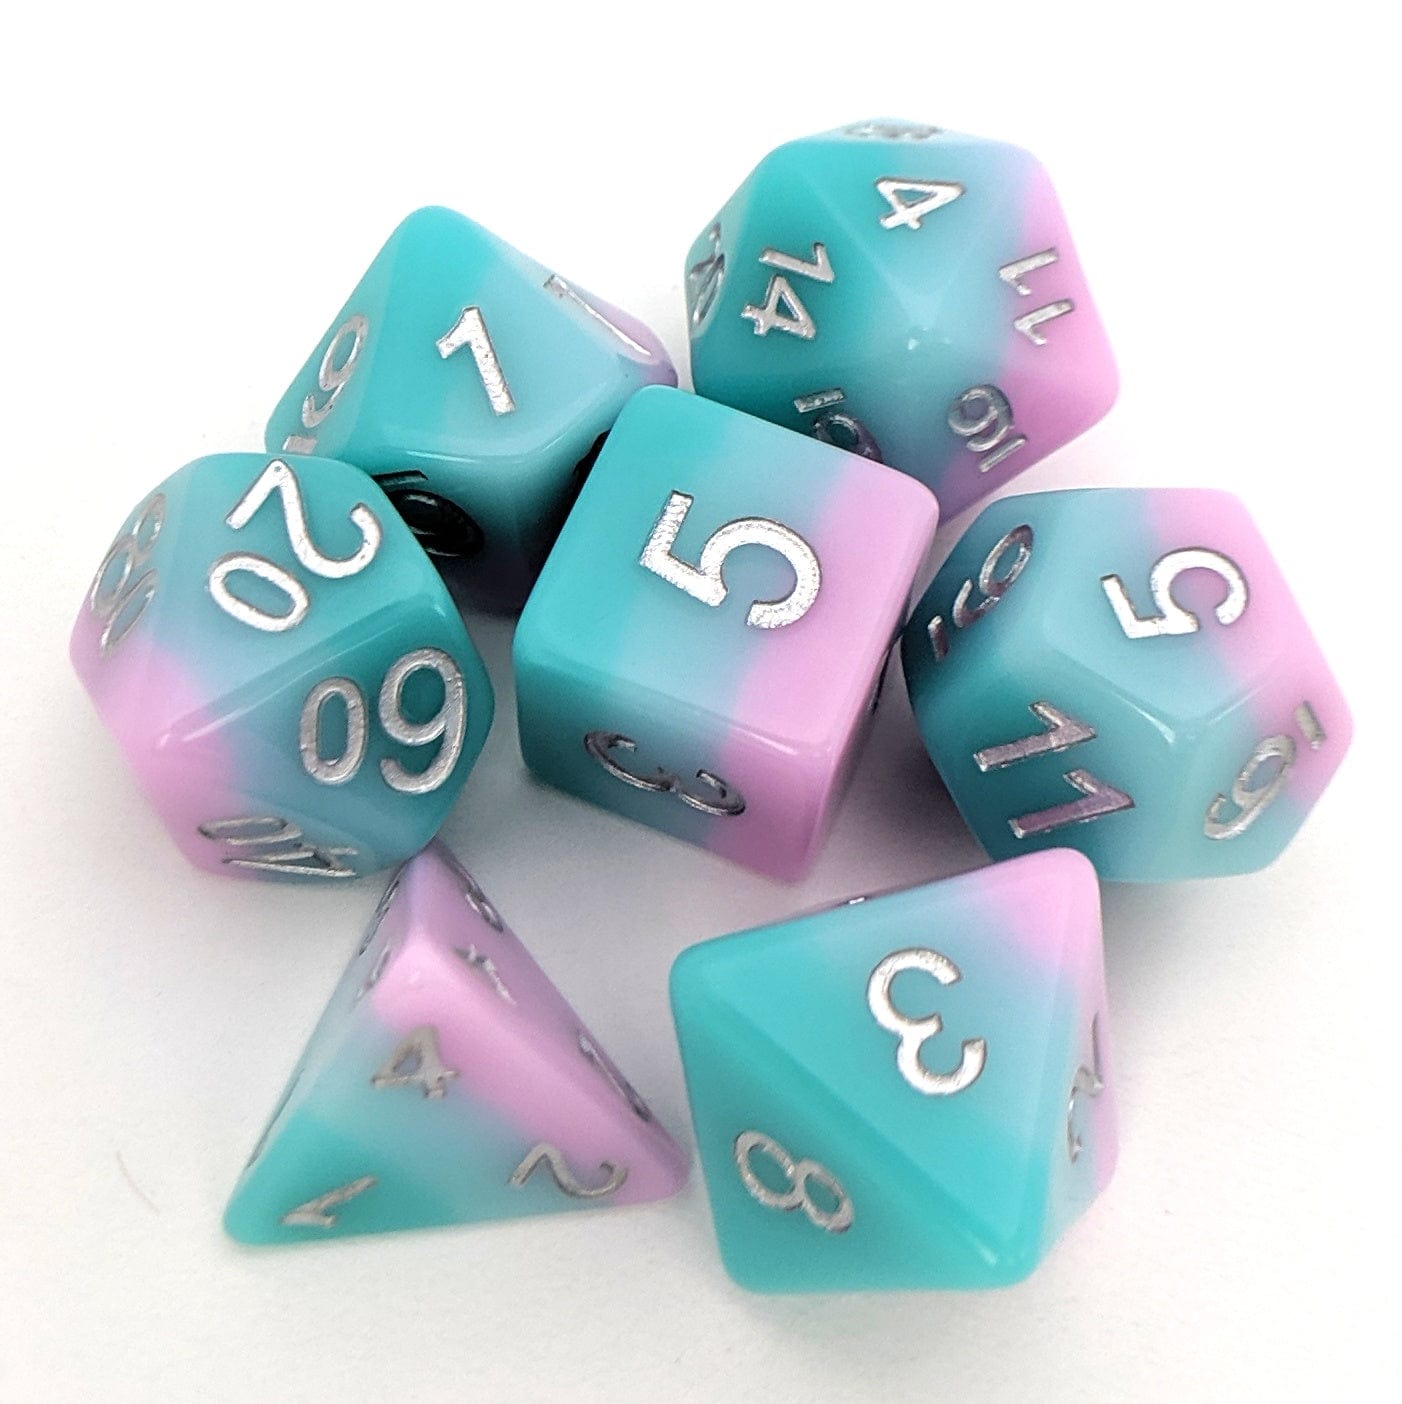 Lover's Whisper Dice Set, Pastel layered dice set by HD - CozyGamer